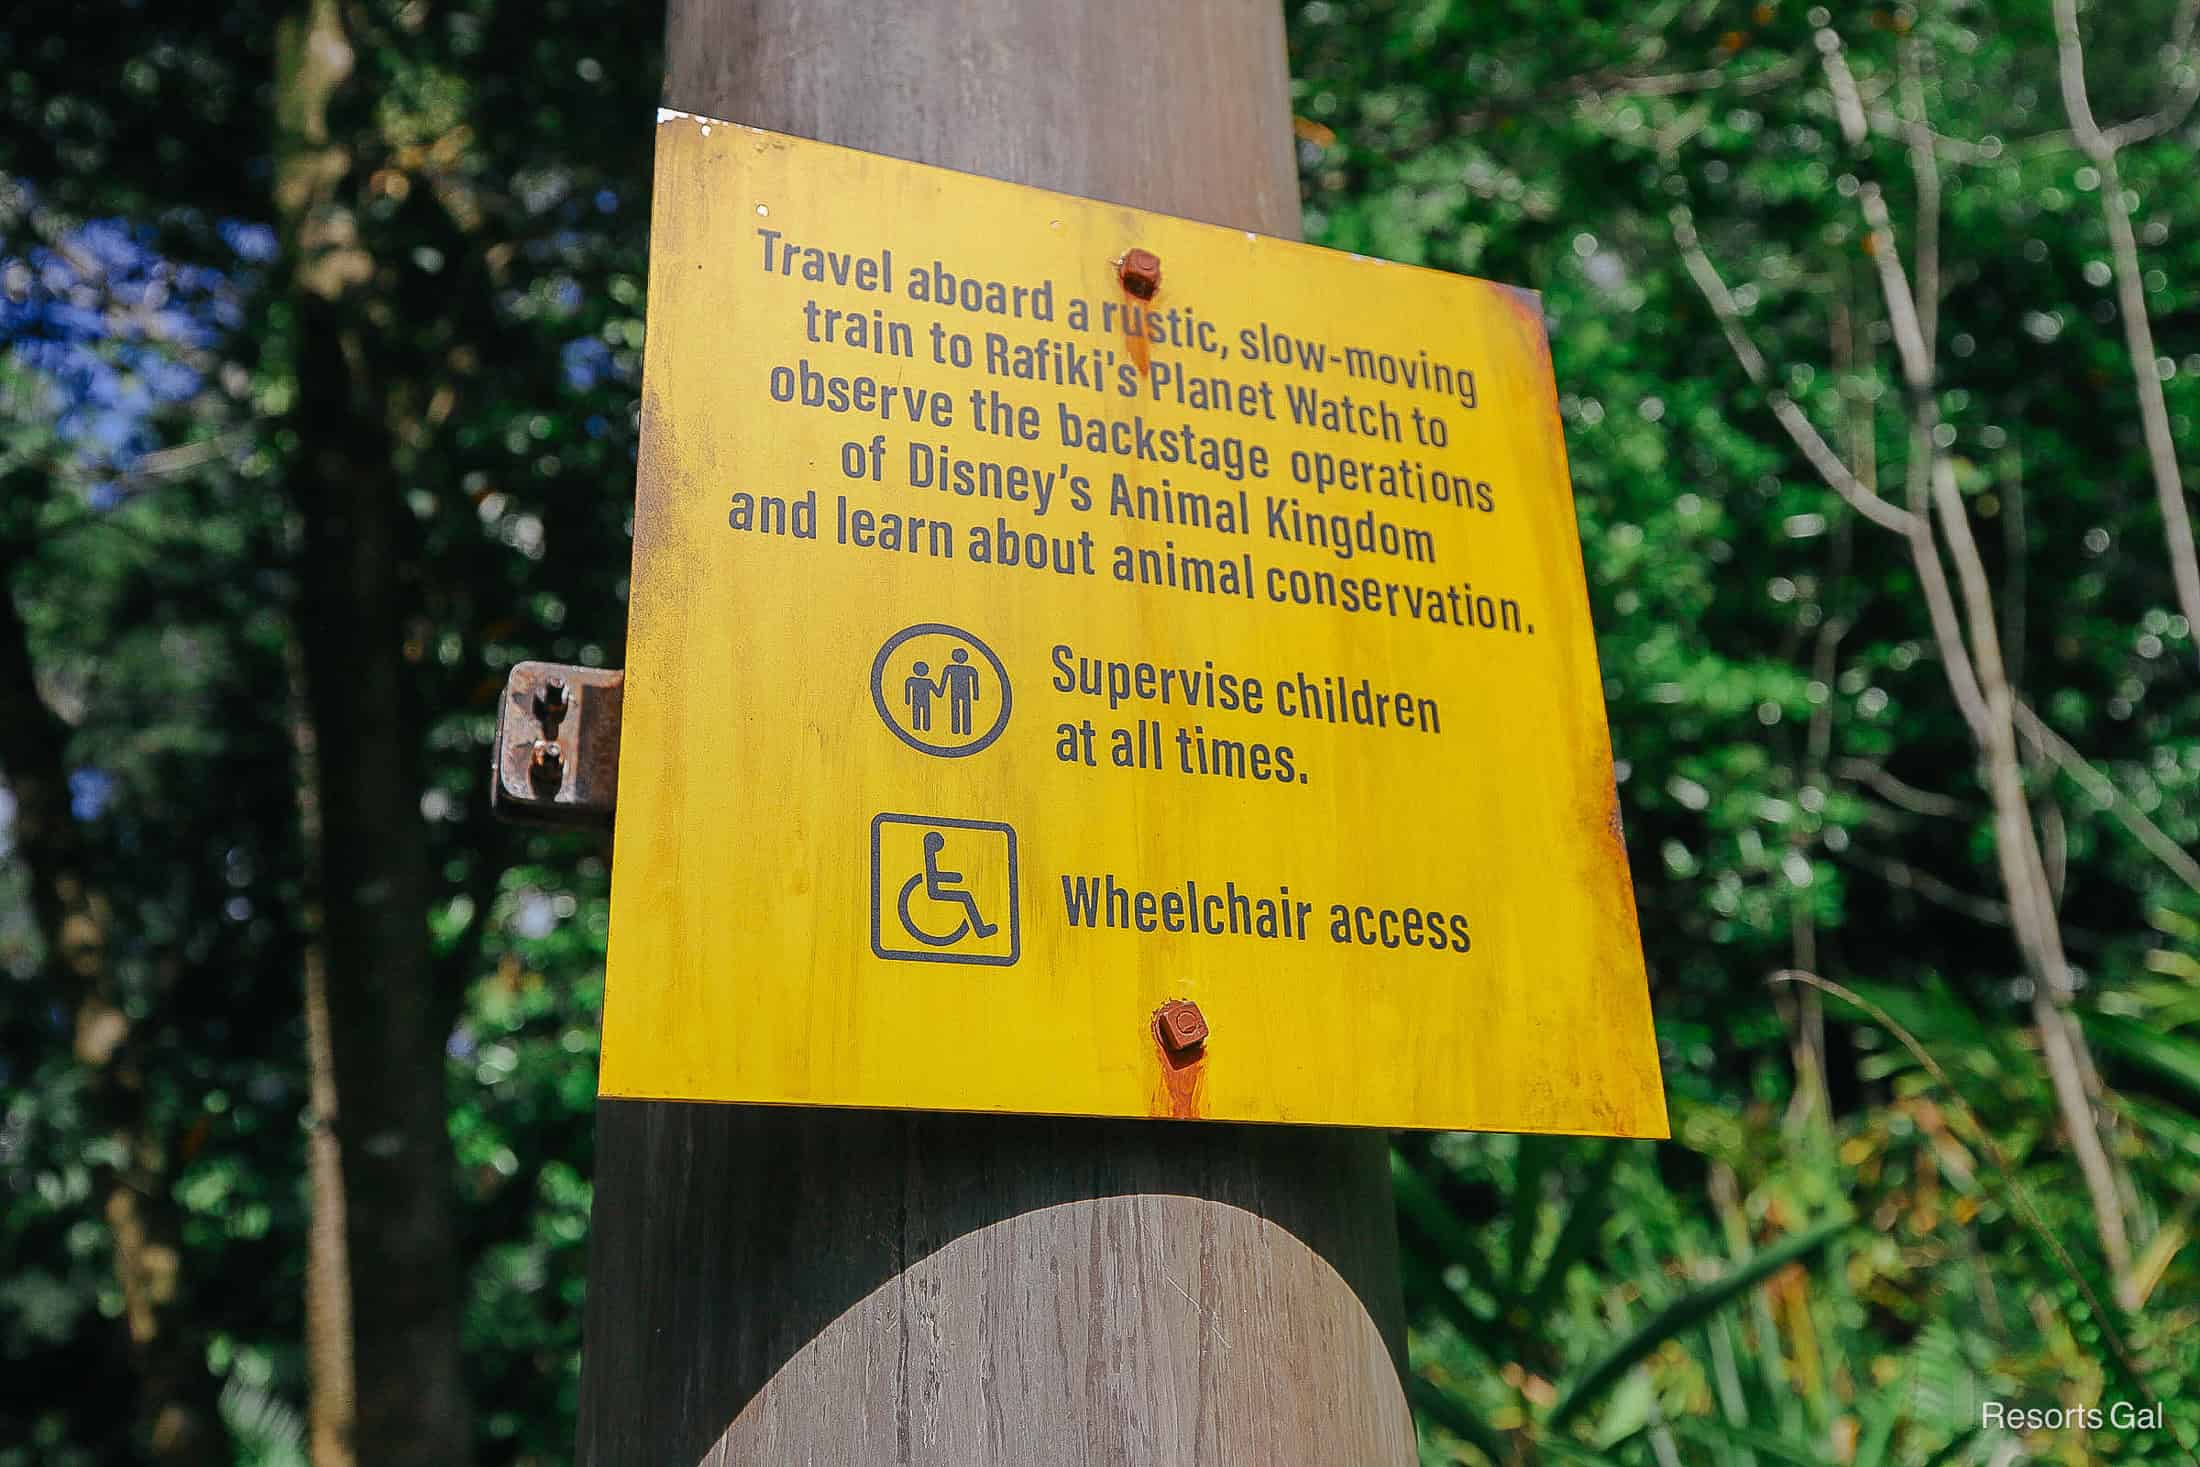 a sign with a description of the ride, children supervision notice, and wheelchair access 